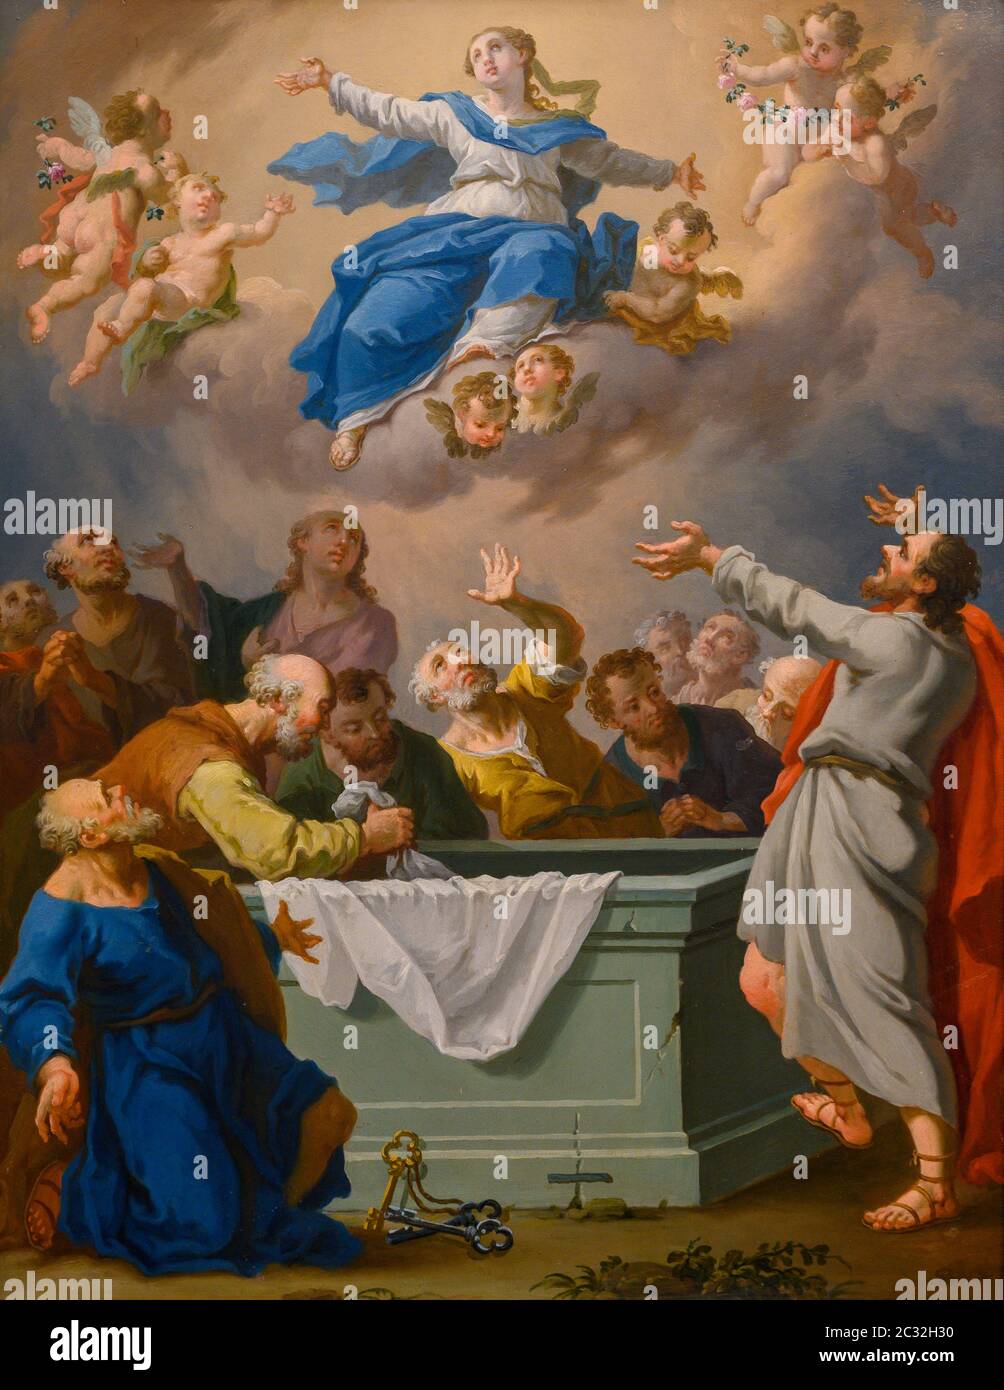 The Assumption of the Virgin Mary. Late 18th century. Central European painter after Sebastiano Ricci. Stock Photo